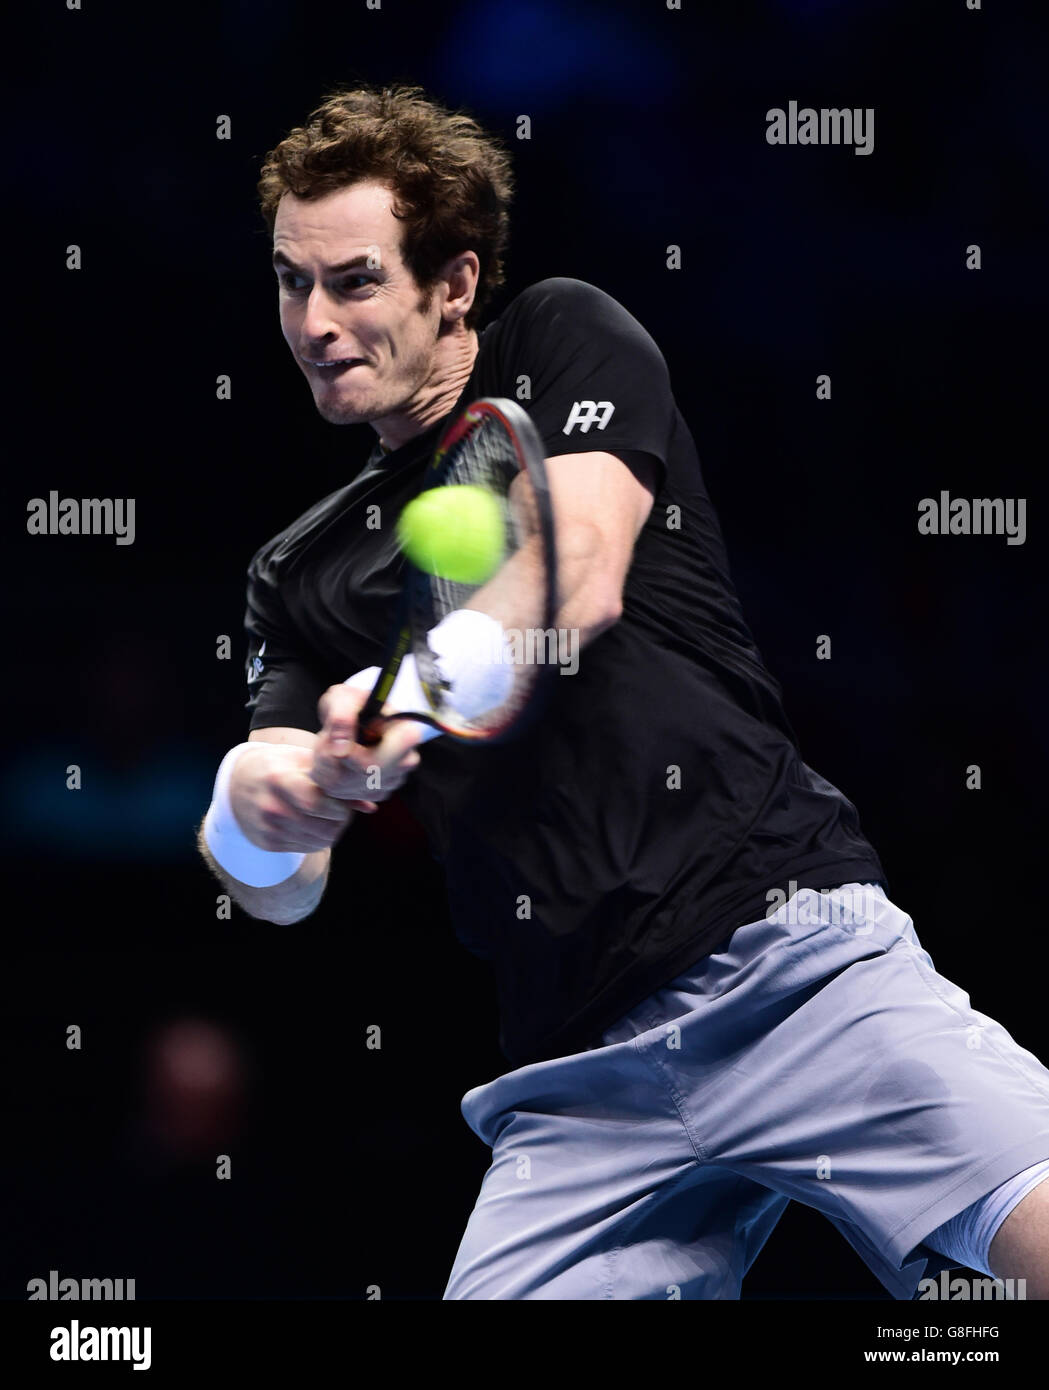 Andy Murray during day six of the ATP World Tour Finals at the O2 Arena, London. PRESS ASSSOCIATION Photo. Picture date: Friday November 20, 2015. See PA story TENNIS London. Photo credit should read: Adam Davy/PA Wire. RESTRICTIONS: , No commercial use without prior permission, please contact PA Images for further information: Tel: +44 (0) 115 8447447. Stock Photo